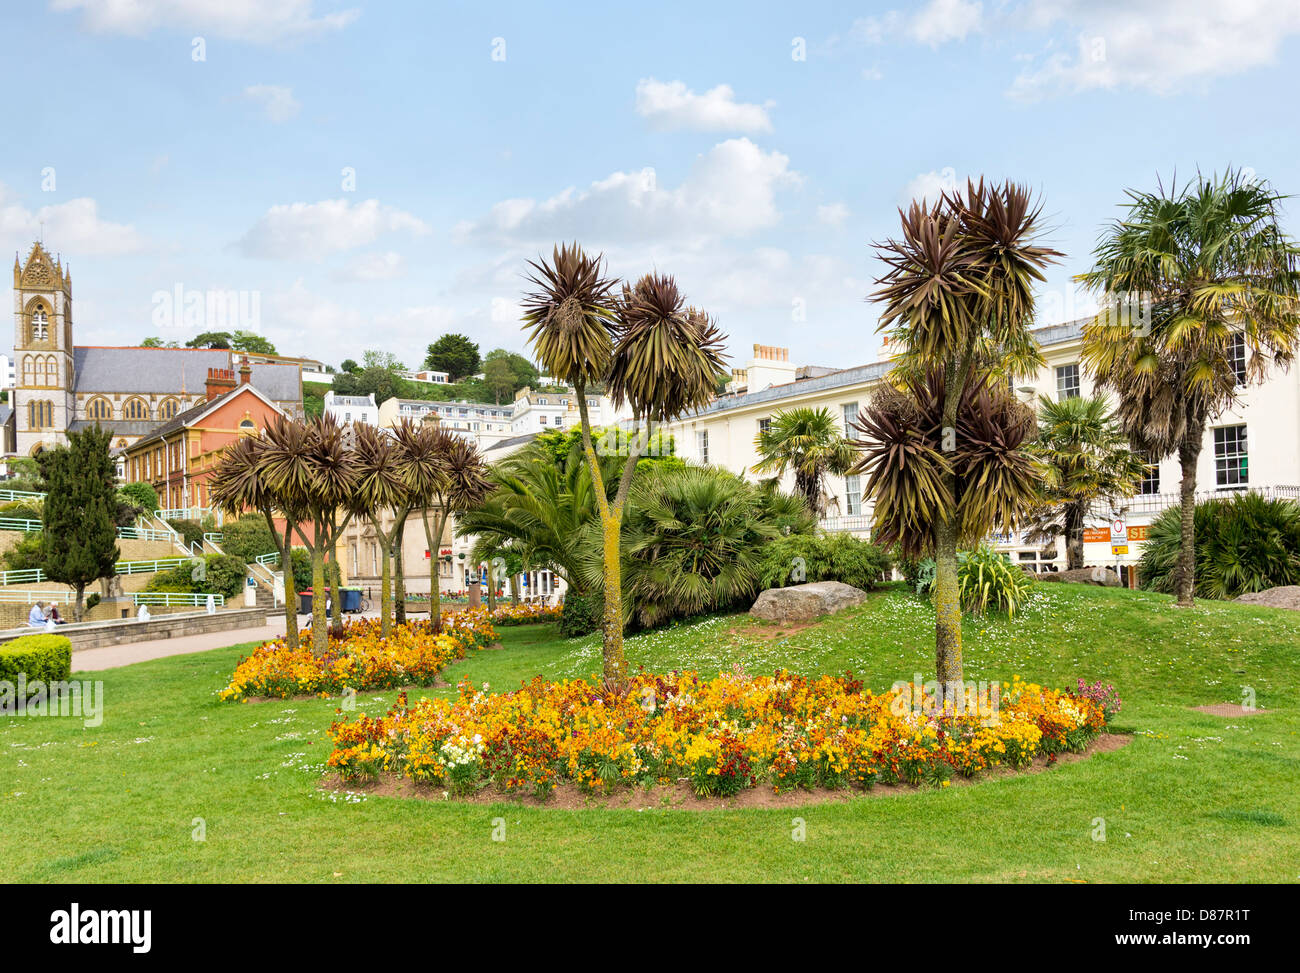 Palm trees in a garden in the town centre, Torquay, Devon, UK Stock Photo